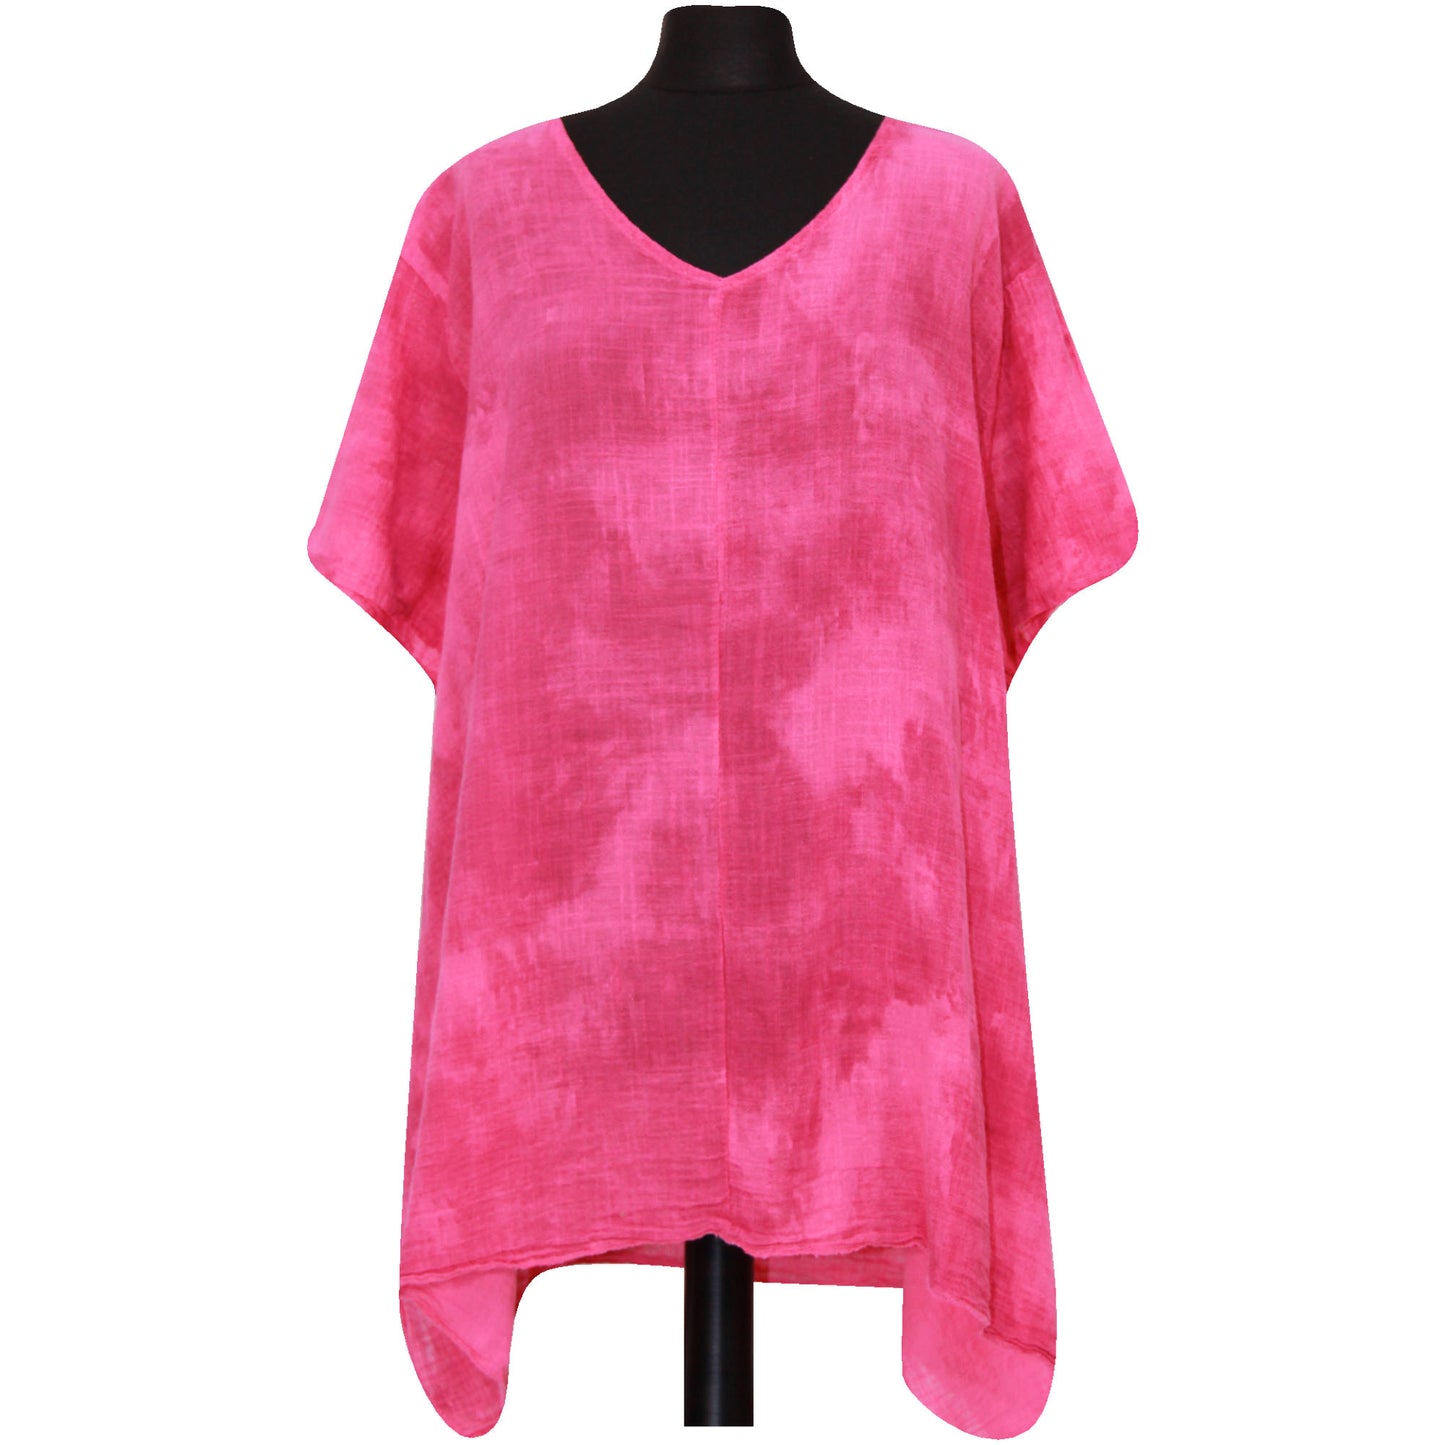 Italian Charm: Women's Quirky Tie Dye Cold Wash Top